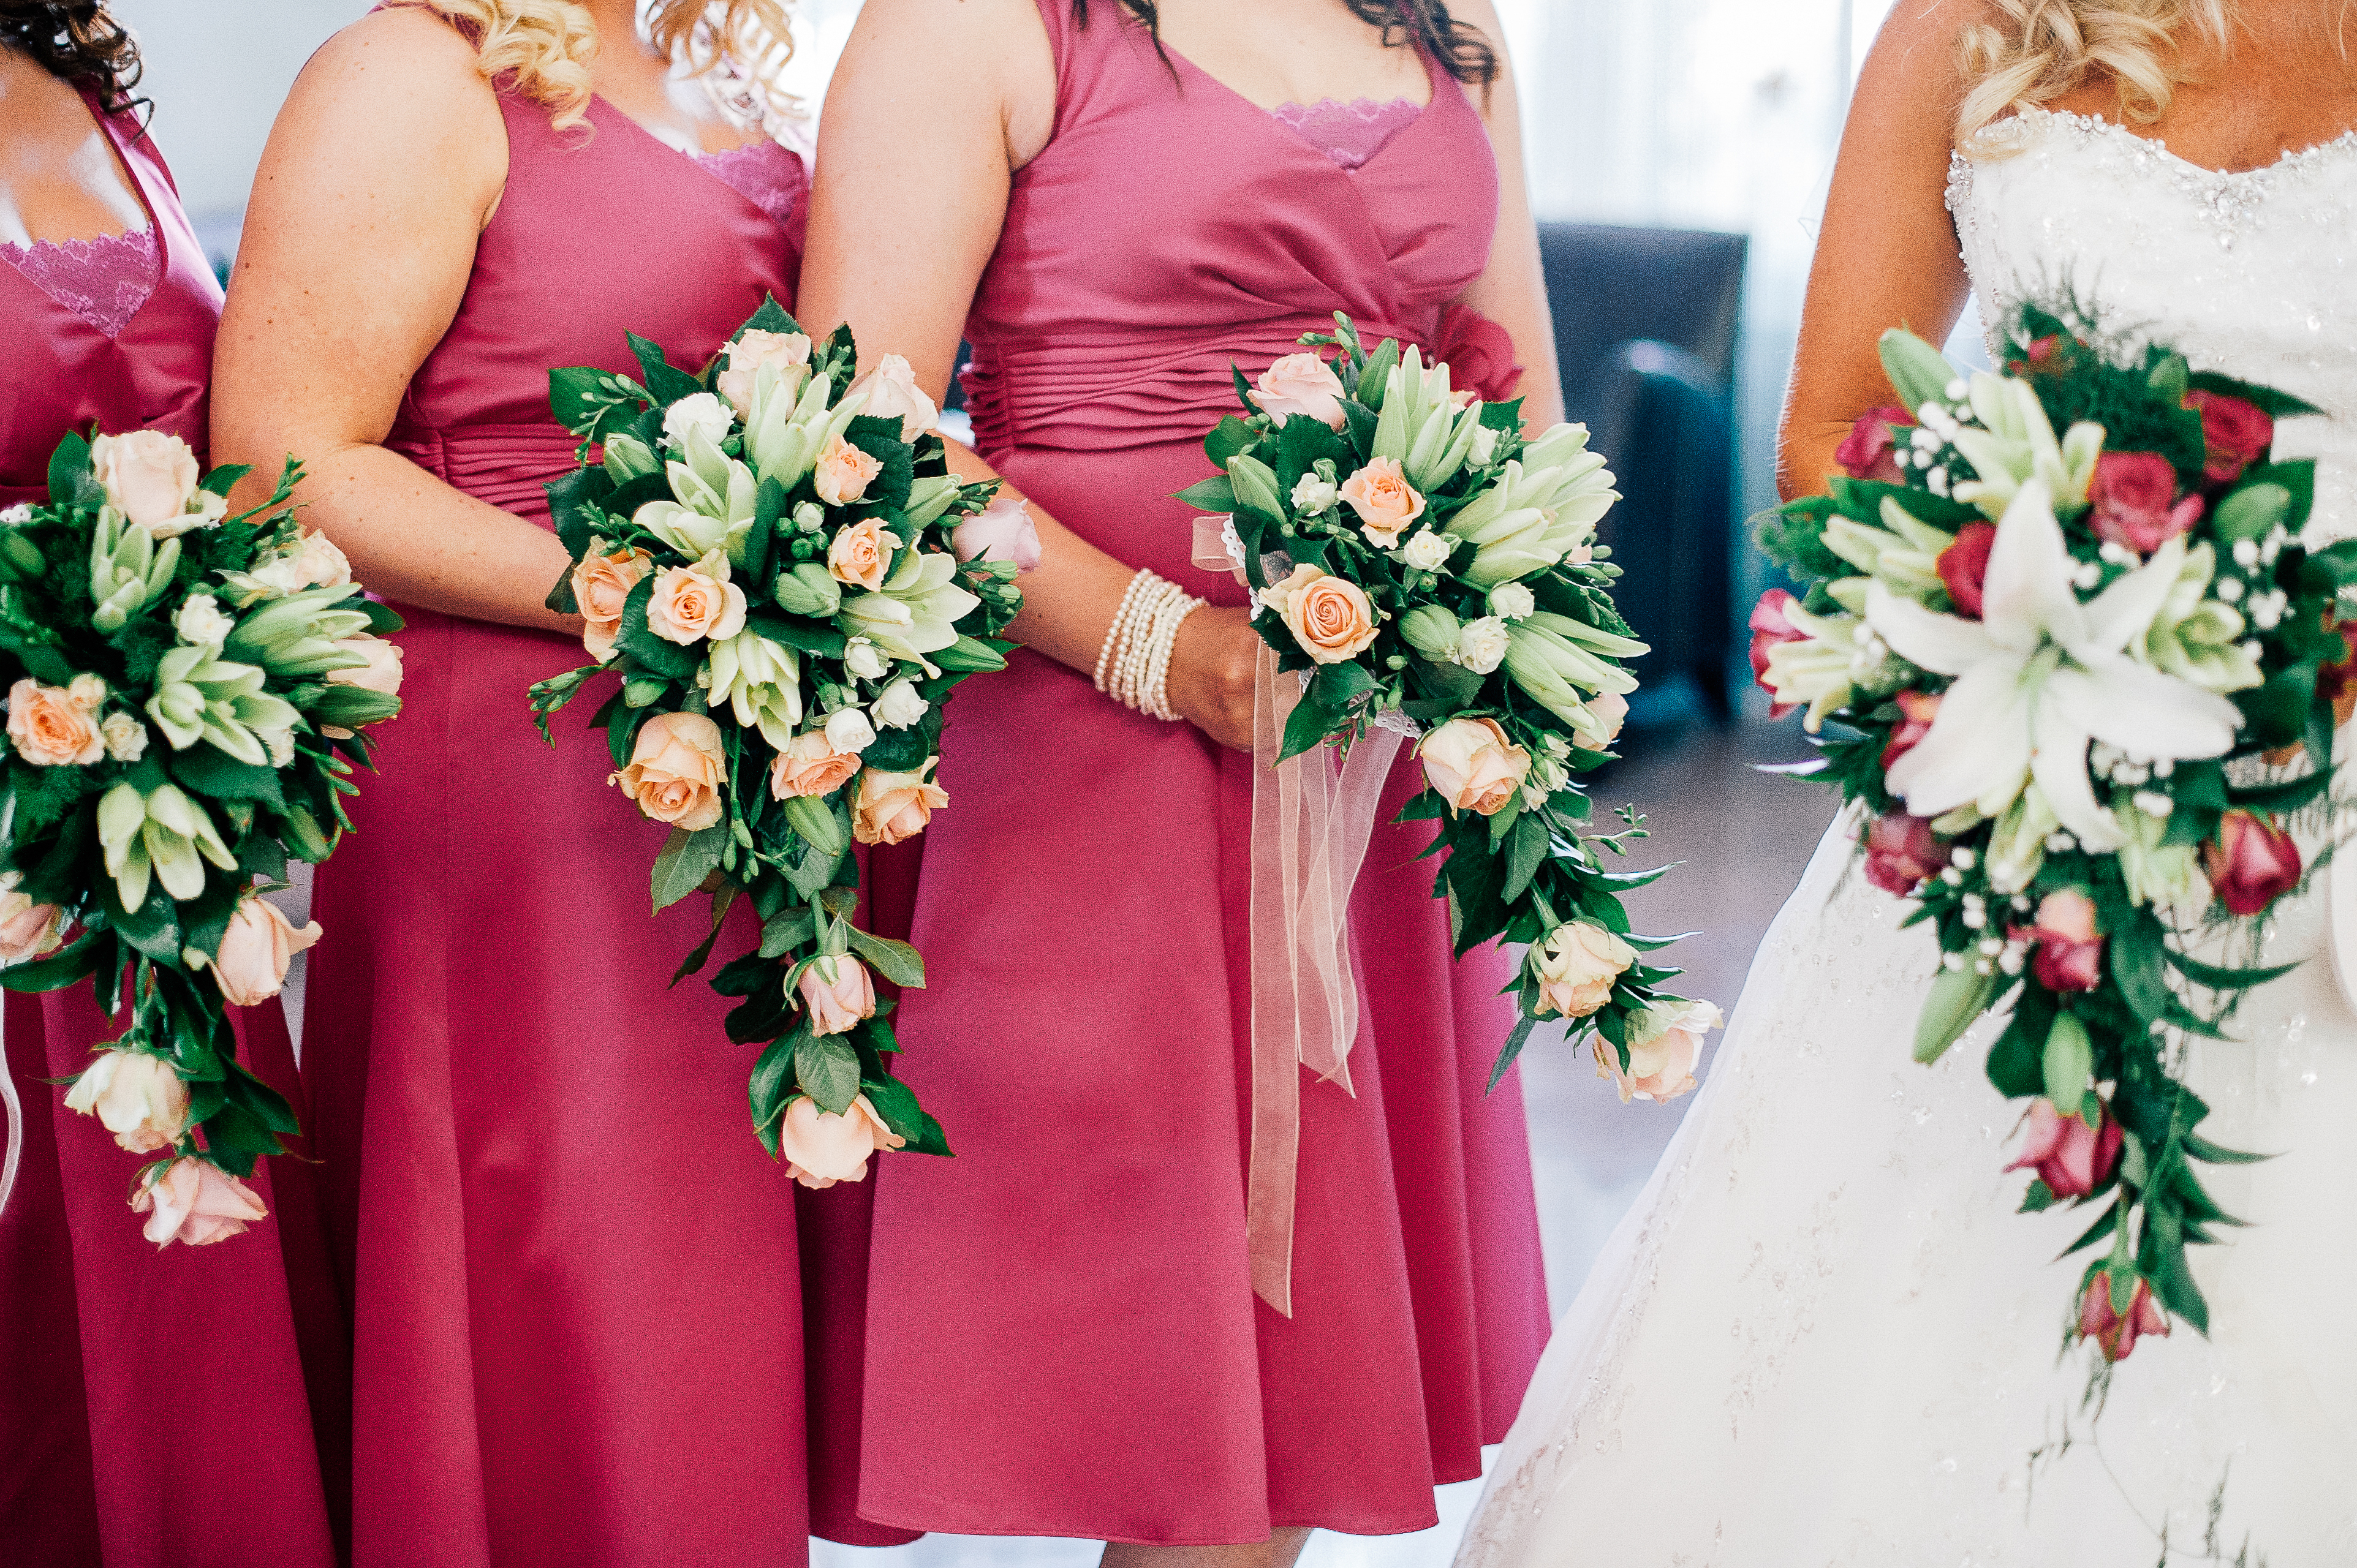 Irish people have been left divided over who should pay for bridesmaid dresses